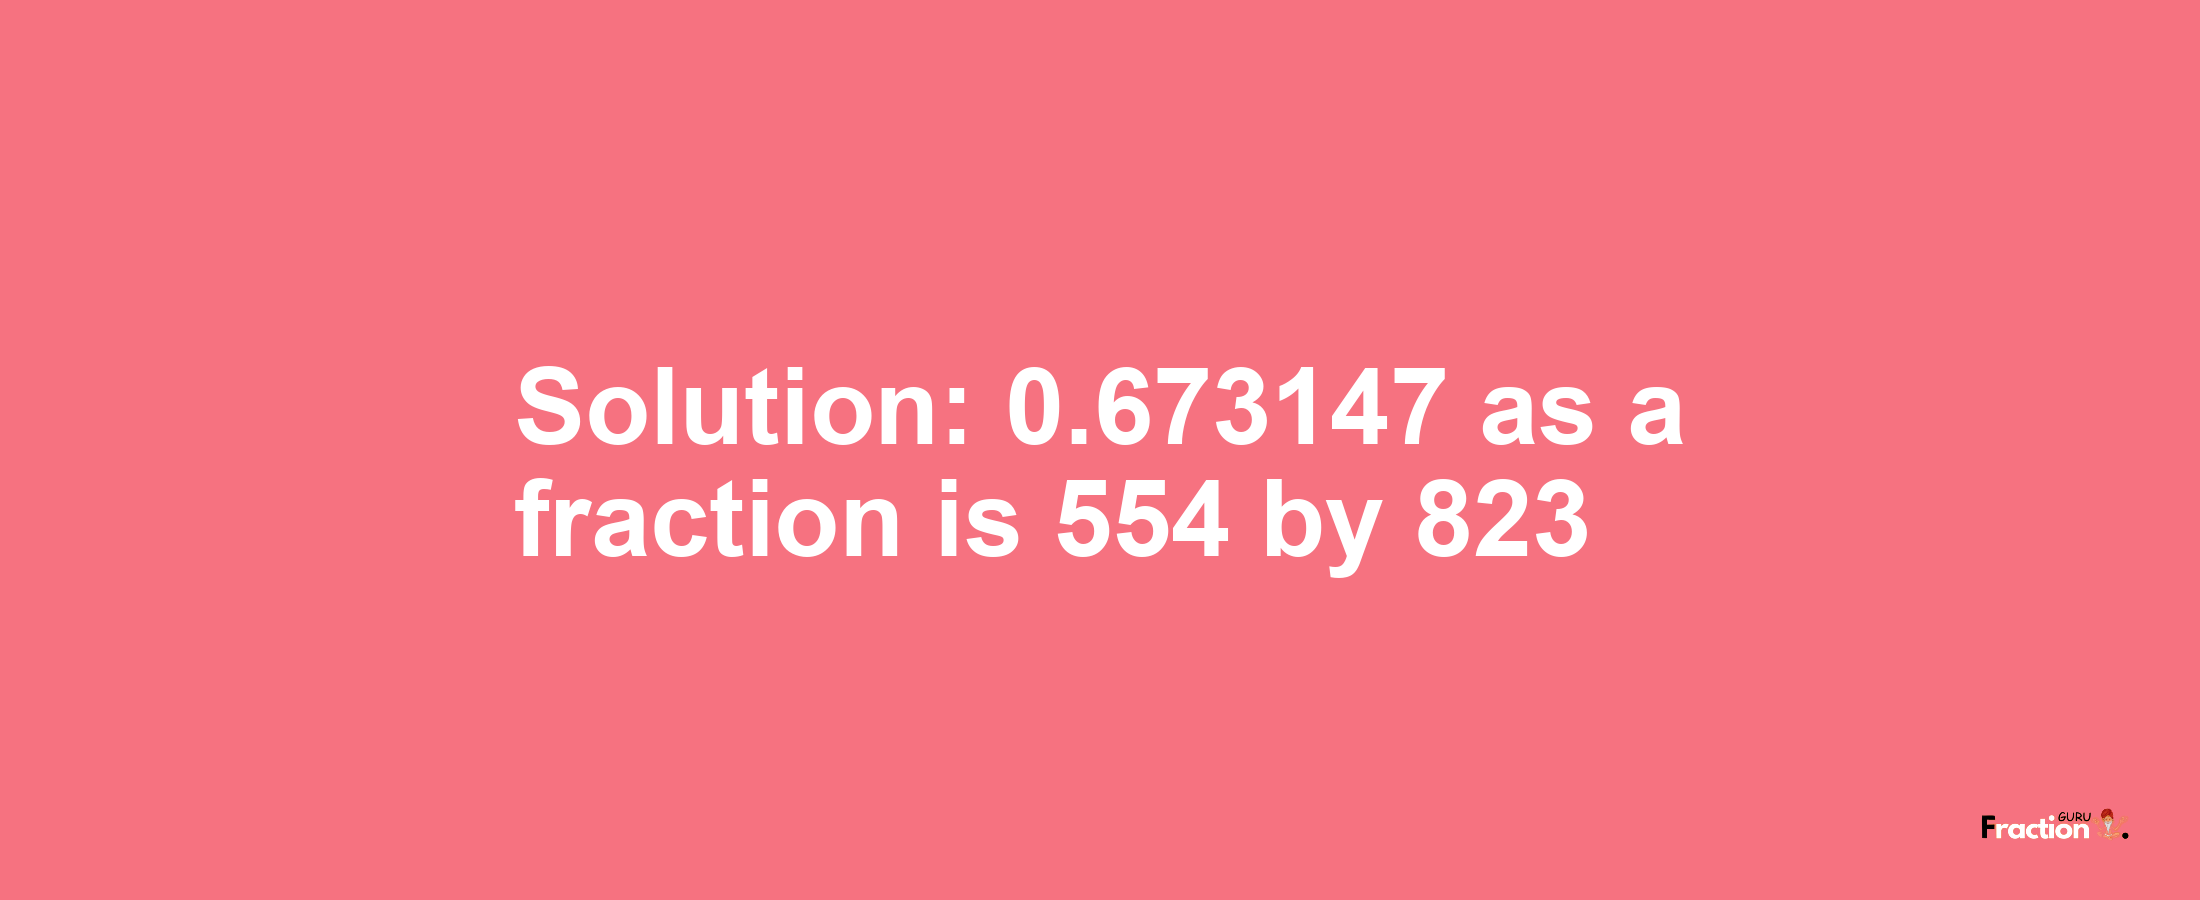 Solution:0.673147 as a fraction is 554/823